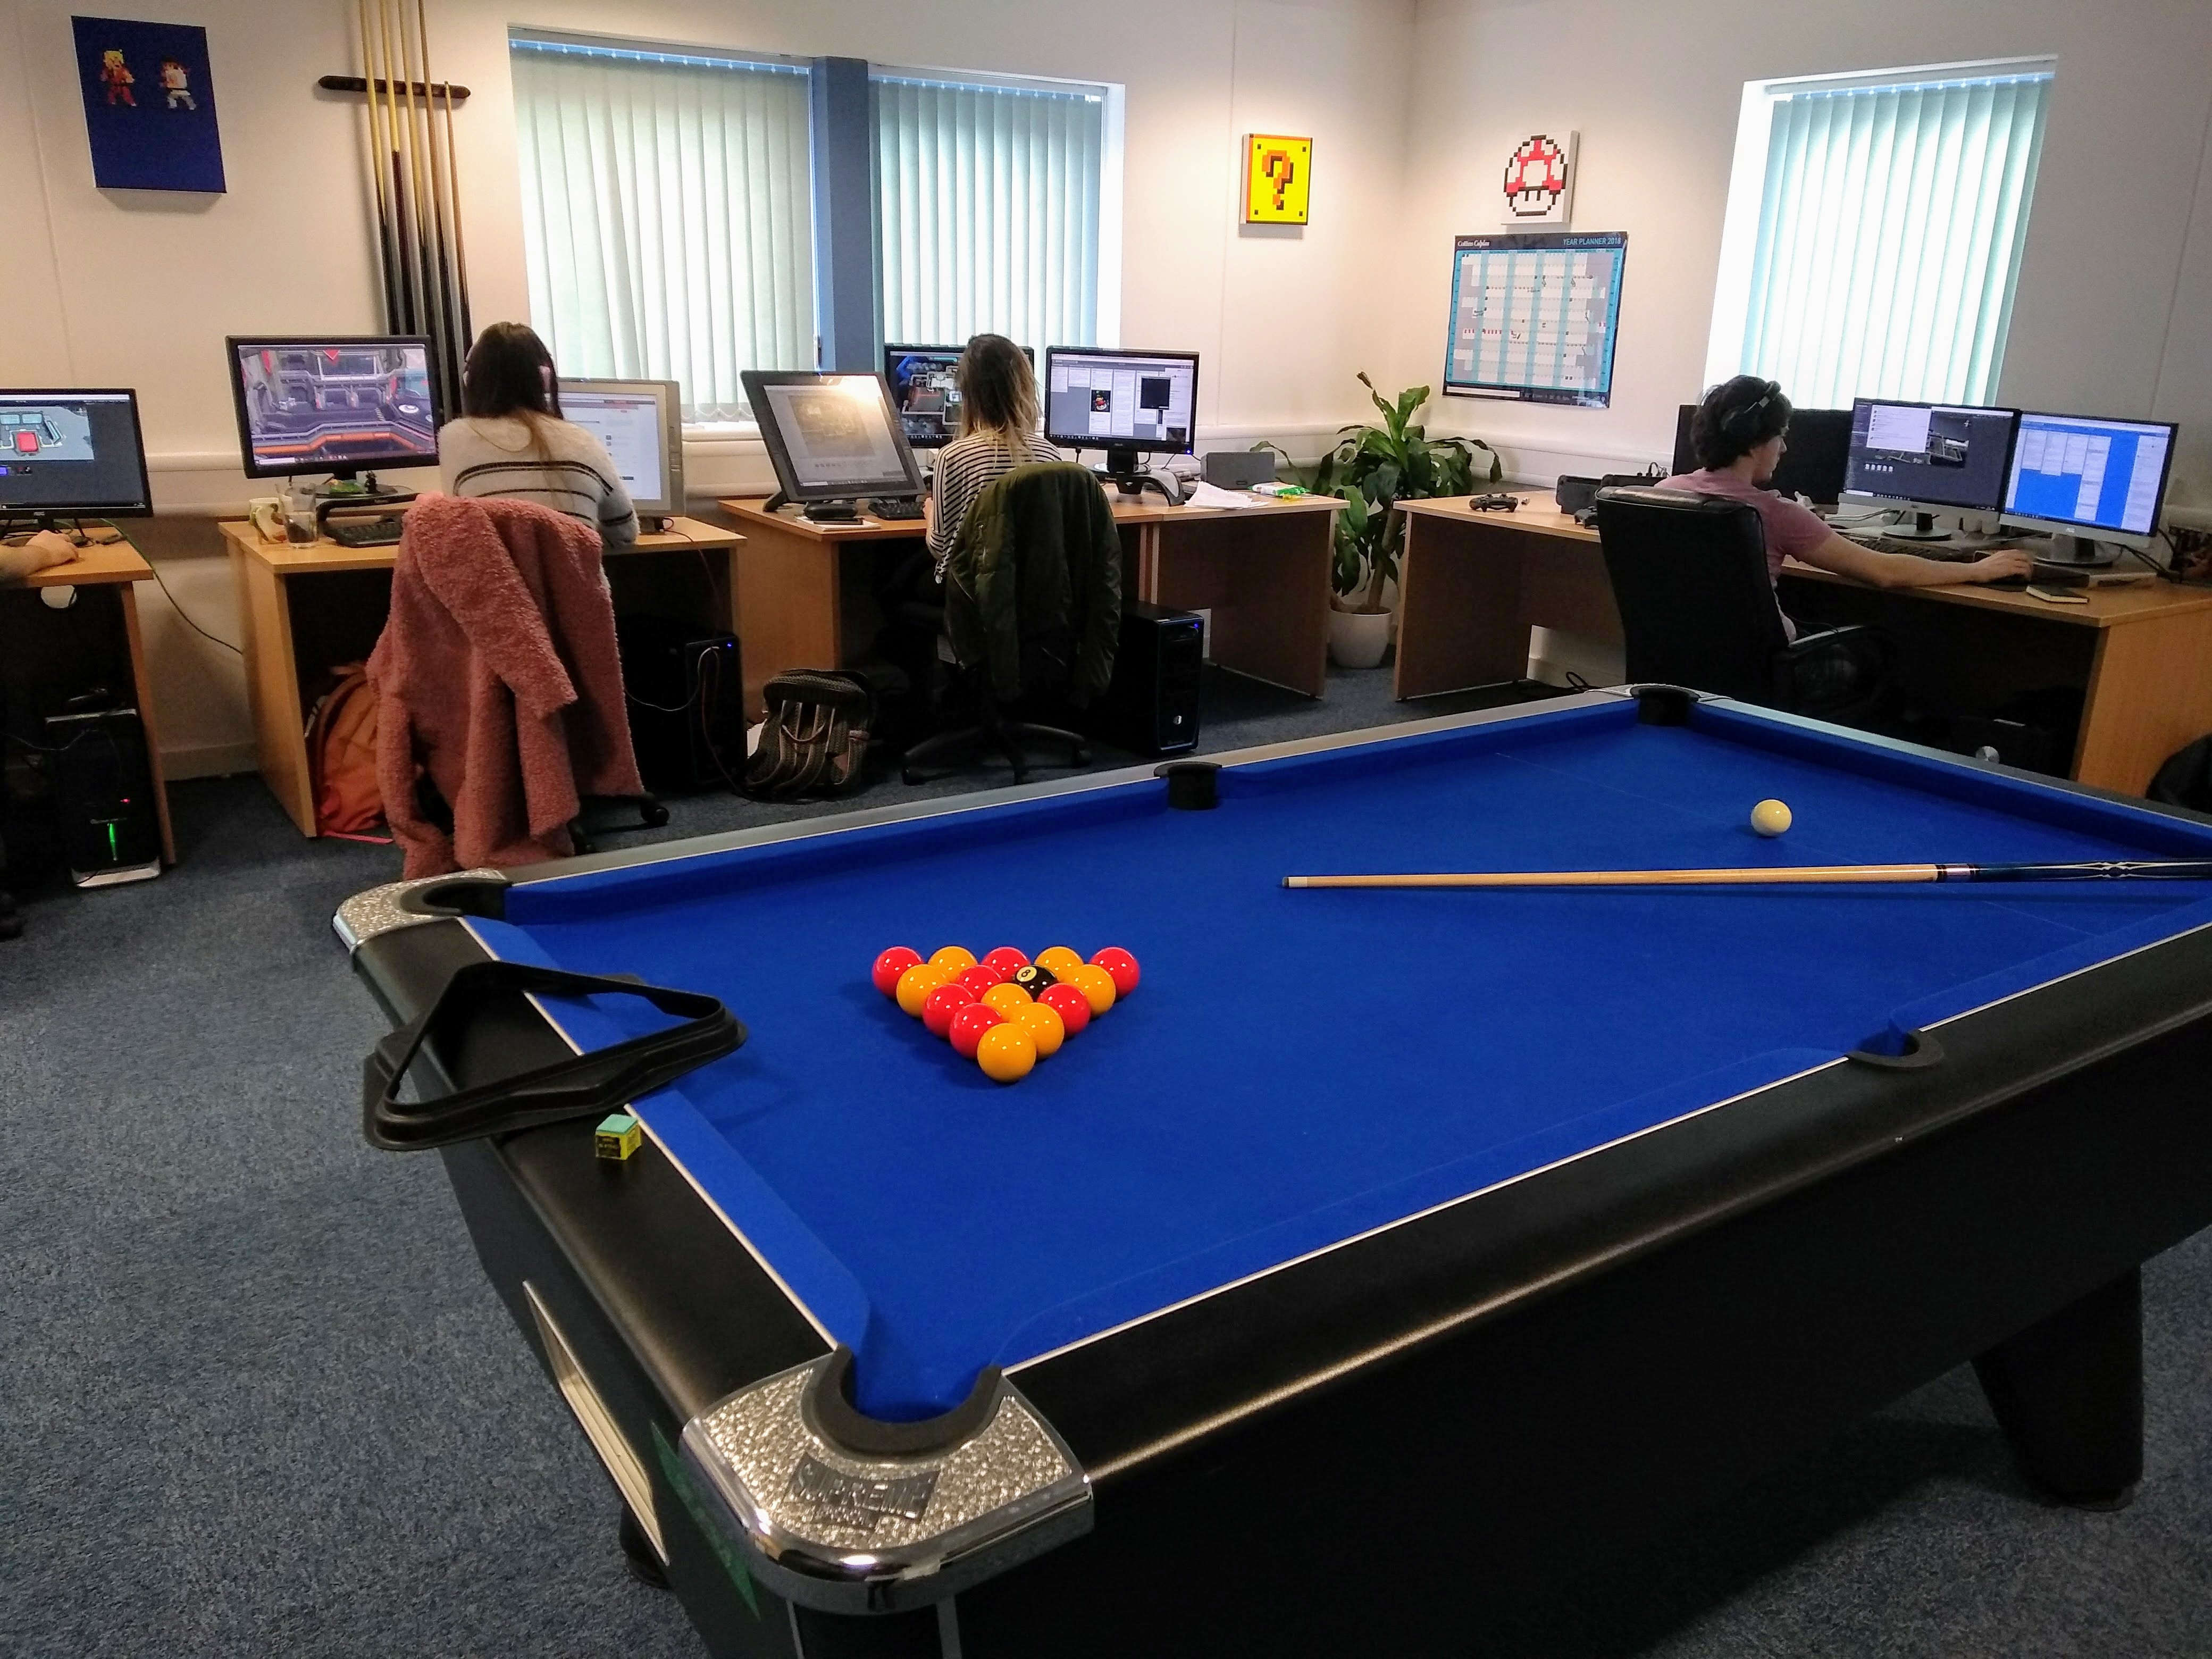 Our pool table, used for many a lunchtime game, with our Catastronauts team busy in the background!